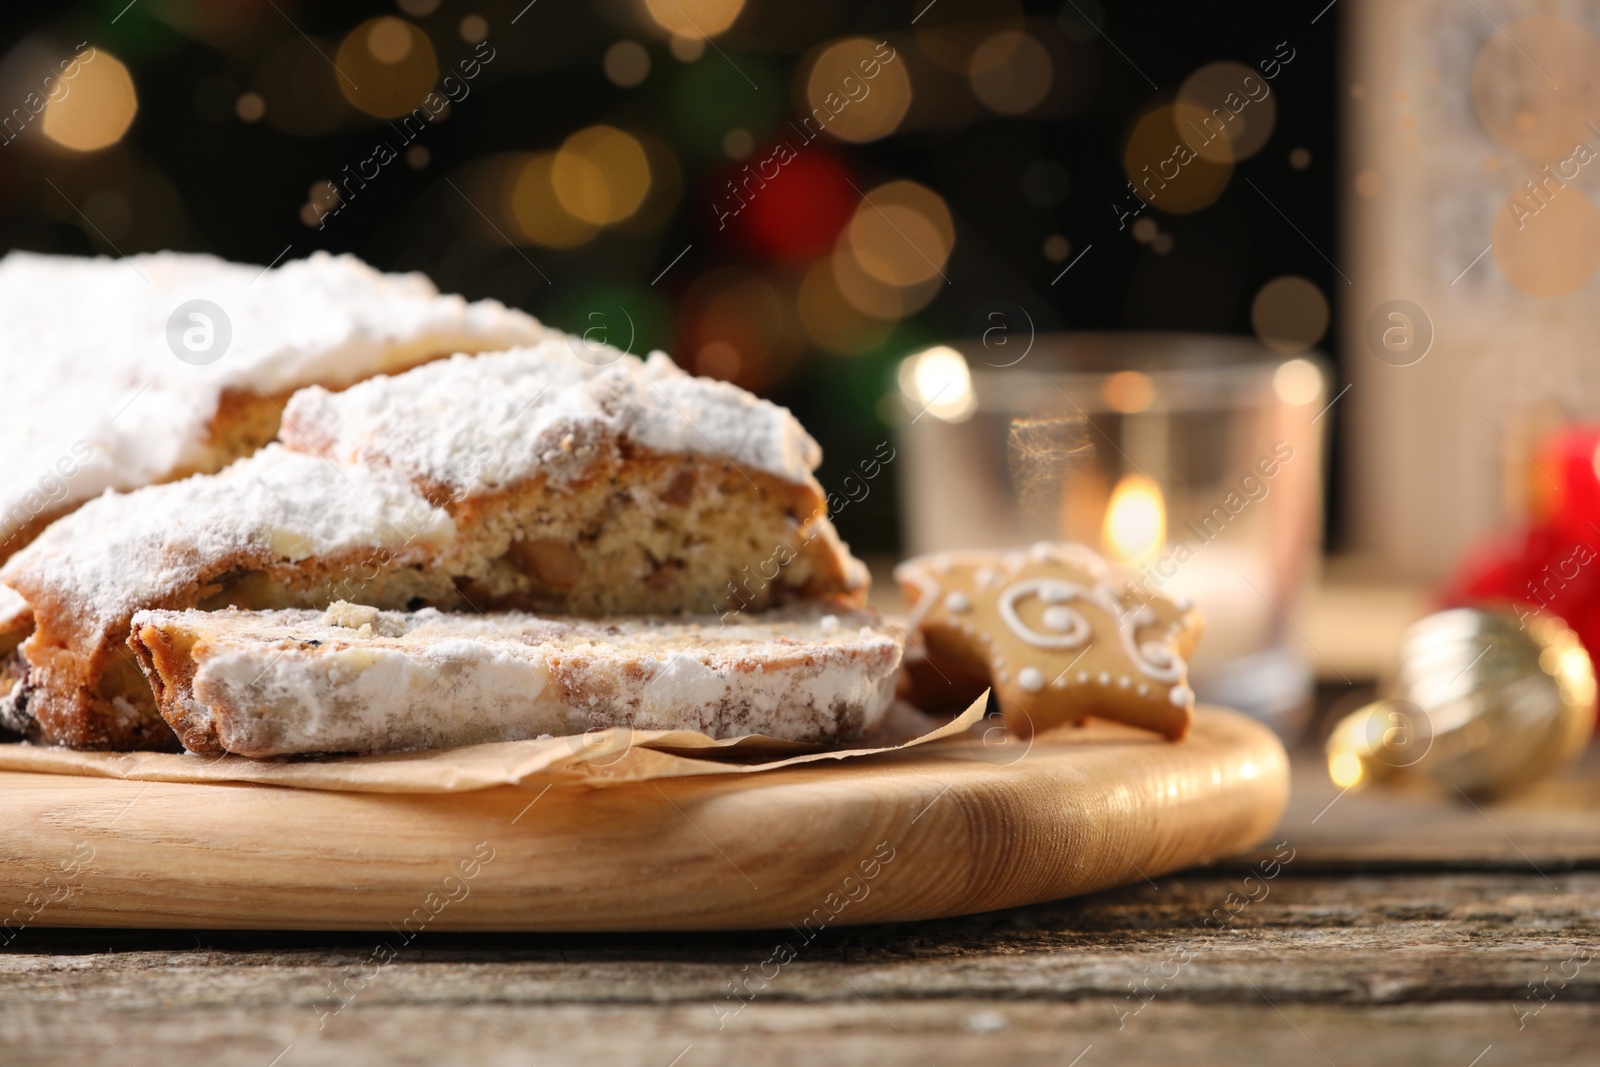 Photo of Traditional Christmas Stollen with icing sugar on wooden table against blurred festive lights